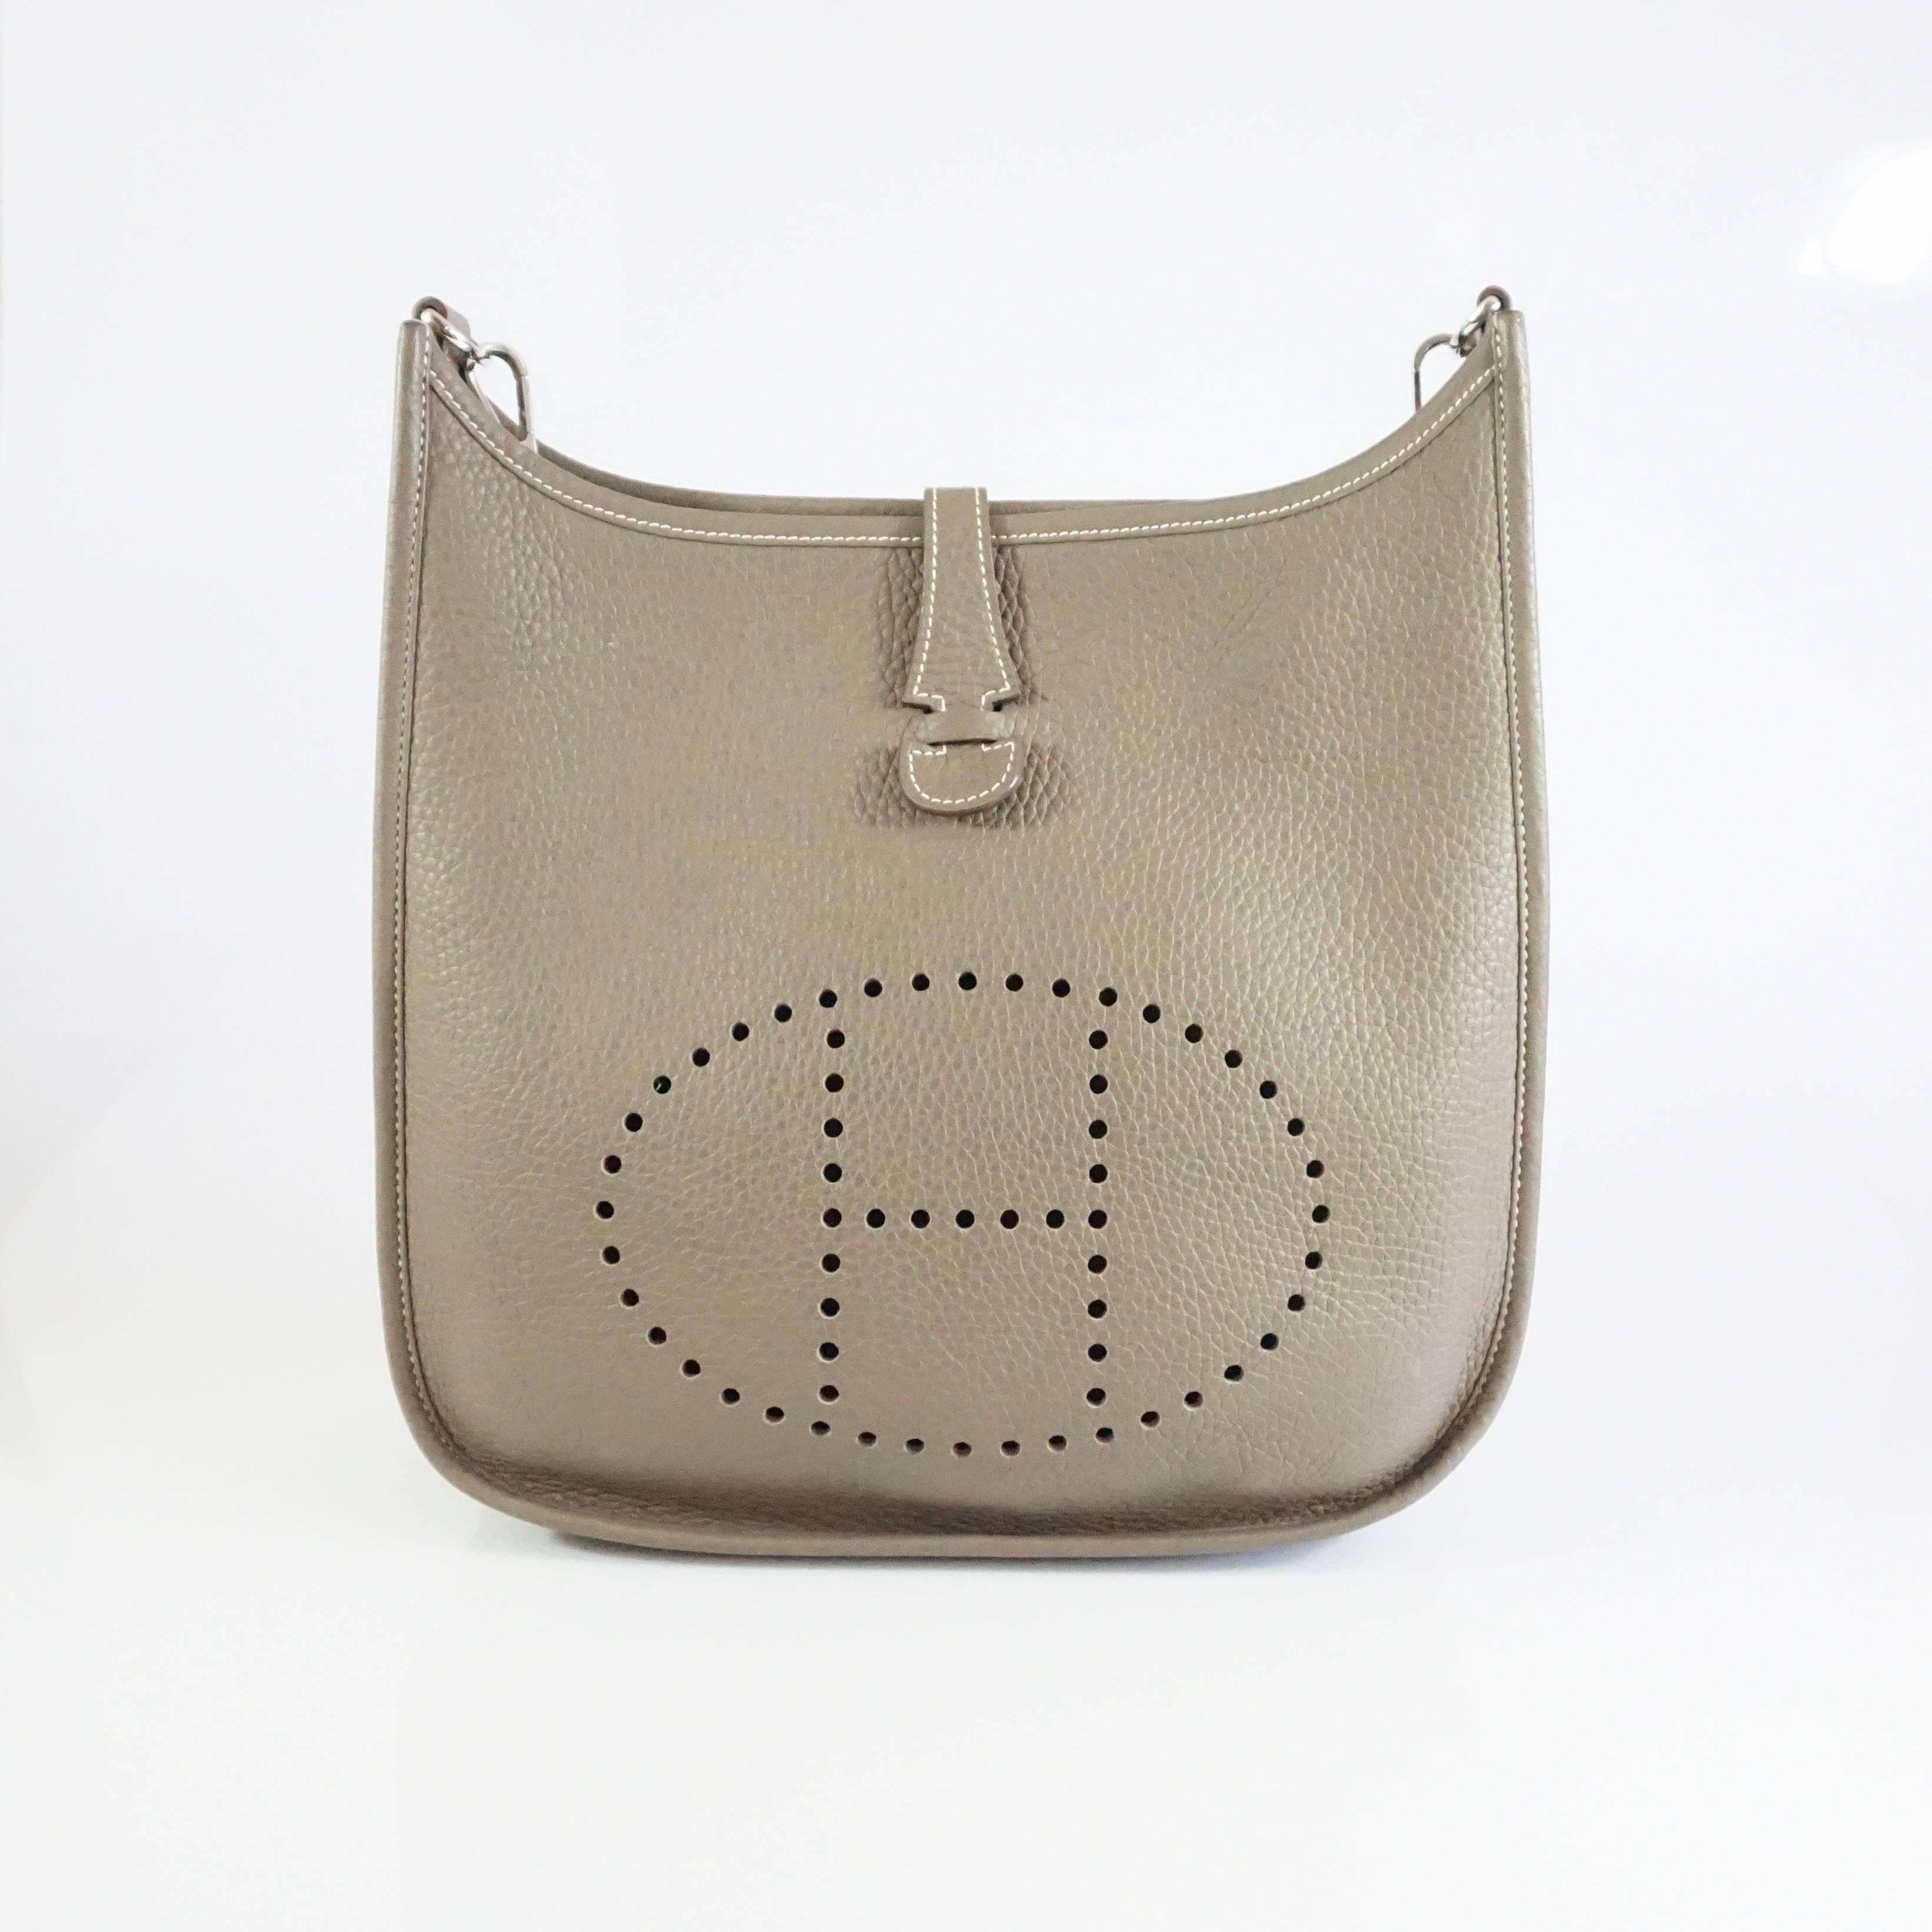 This staple Hermes Evelyne III PM is in the ultra wearable Etoupe color and the desirable Togo leather. The bag comes with a back pocket, a taupe crossbody strap, strap duster, book, bag duster, and box and sales receipt. The bag is in Pristine